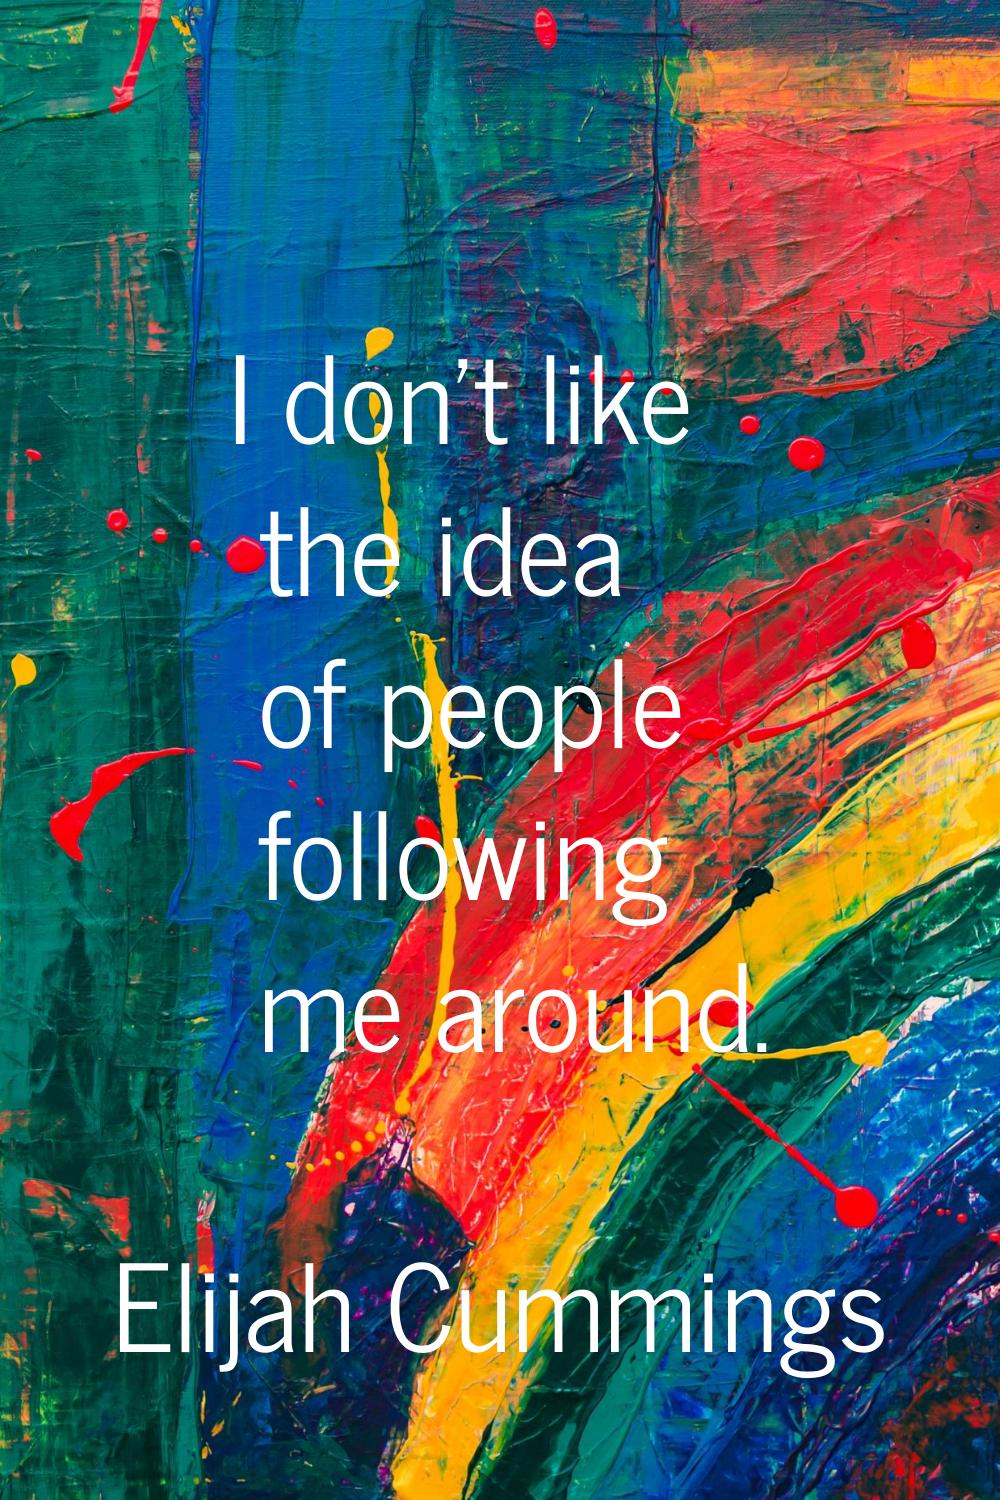 I don't like the idea of people following me around.